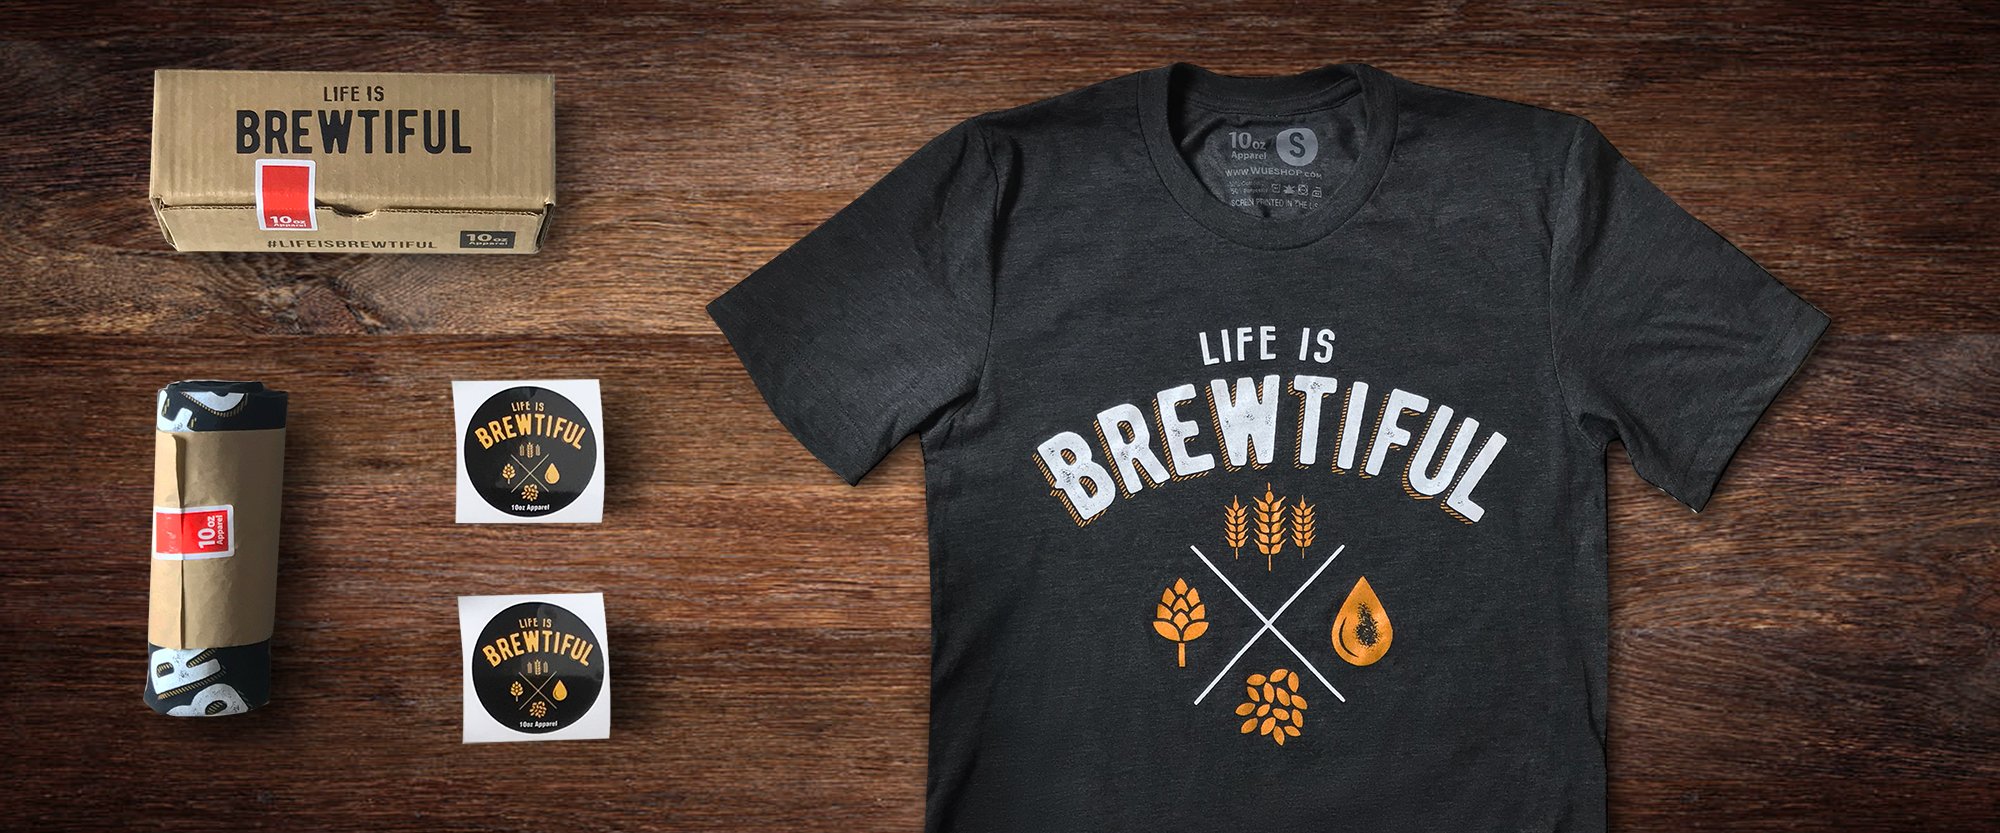 life is brewtiful set